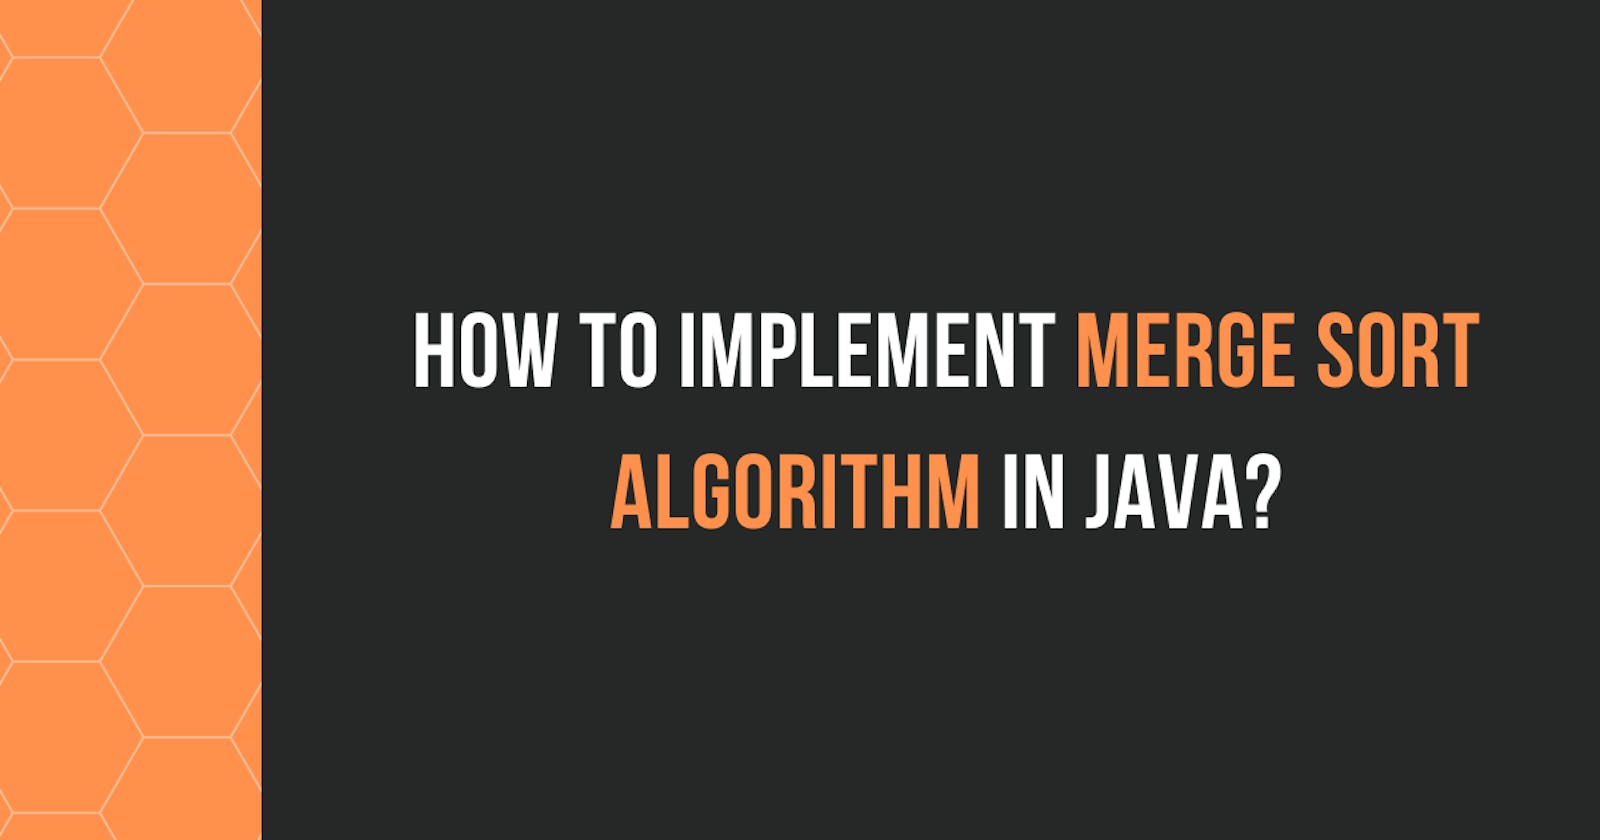 How to Implement Merge Sort Algorithm in Java?